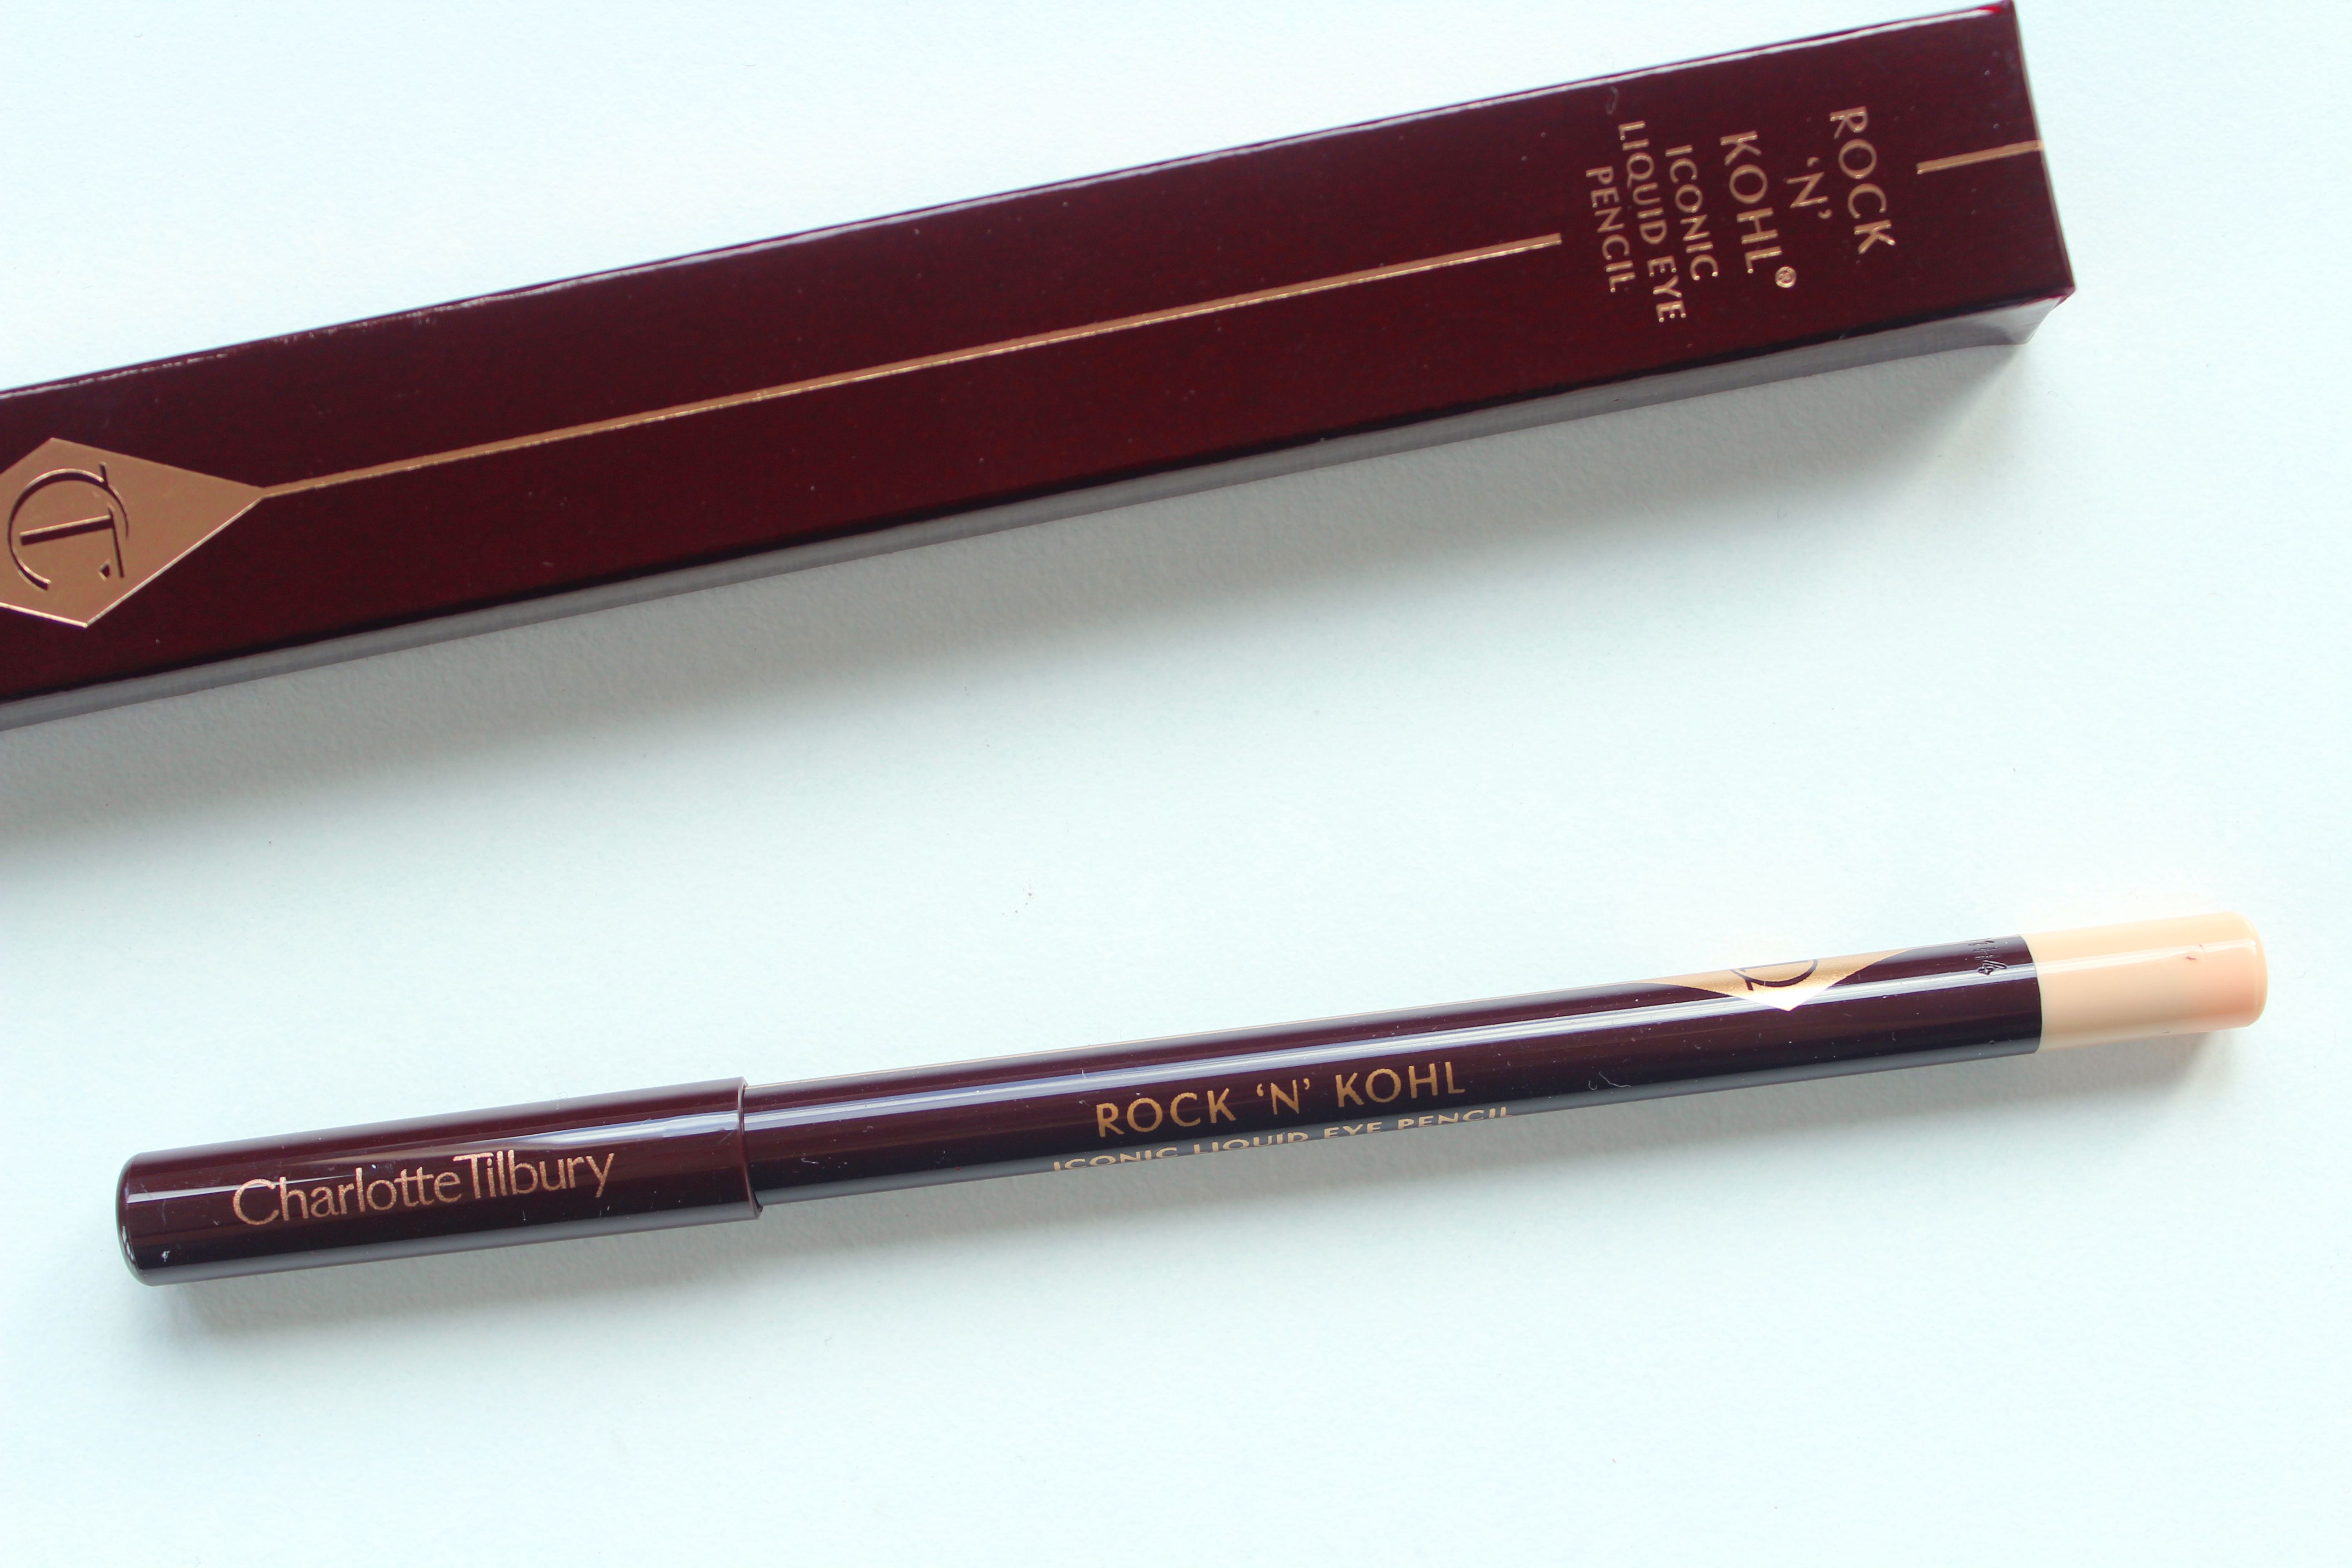 Charlotte-Tilbury-haul-and-product-review-all-in-one-Rock-'n'-kohl-iconic-liquid-eye-pencil-in-Eye-Cheat-for-brighter-eyes-by-face-made-up-facemadeup